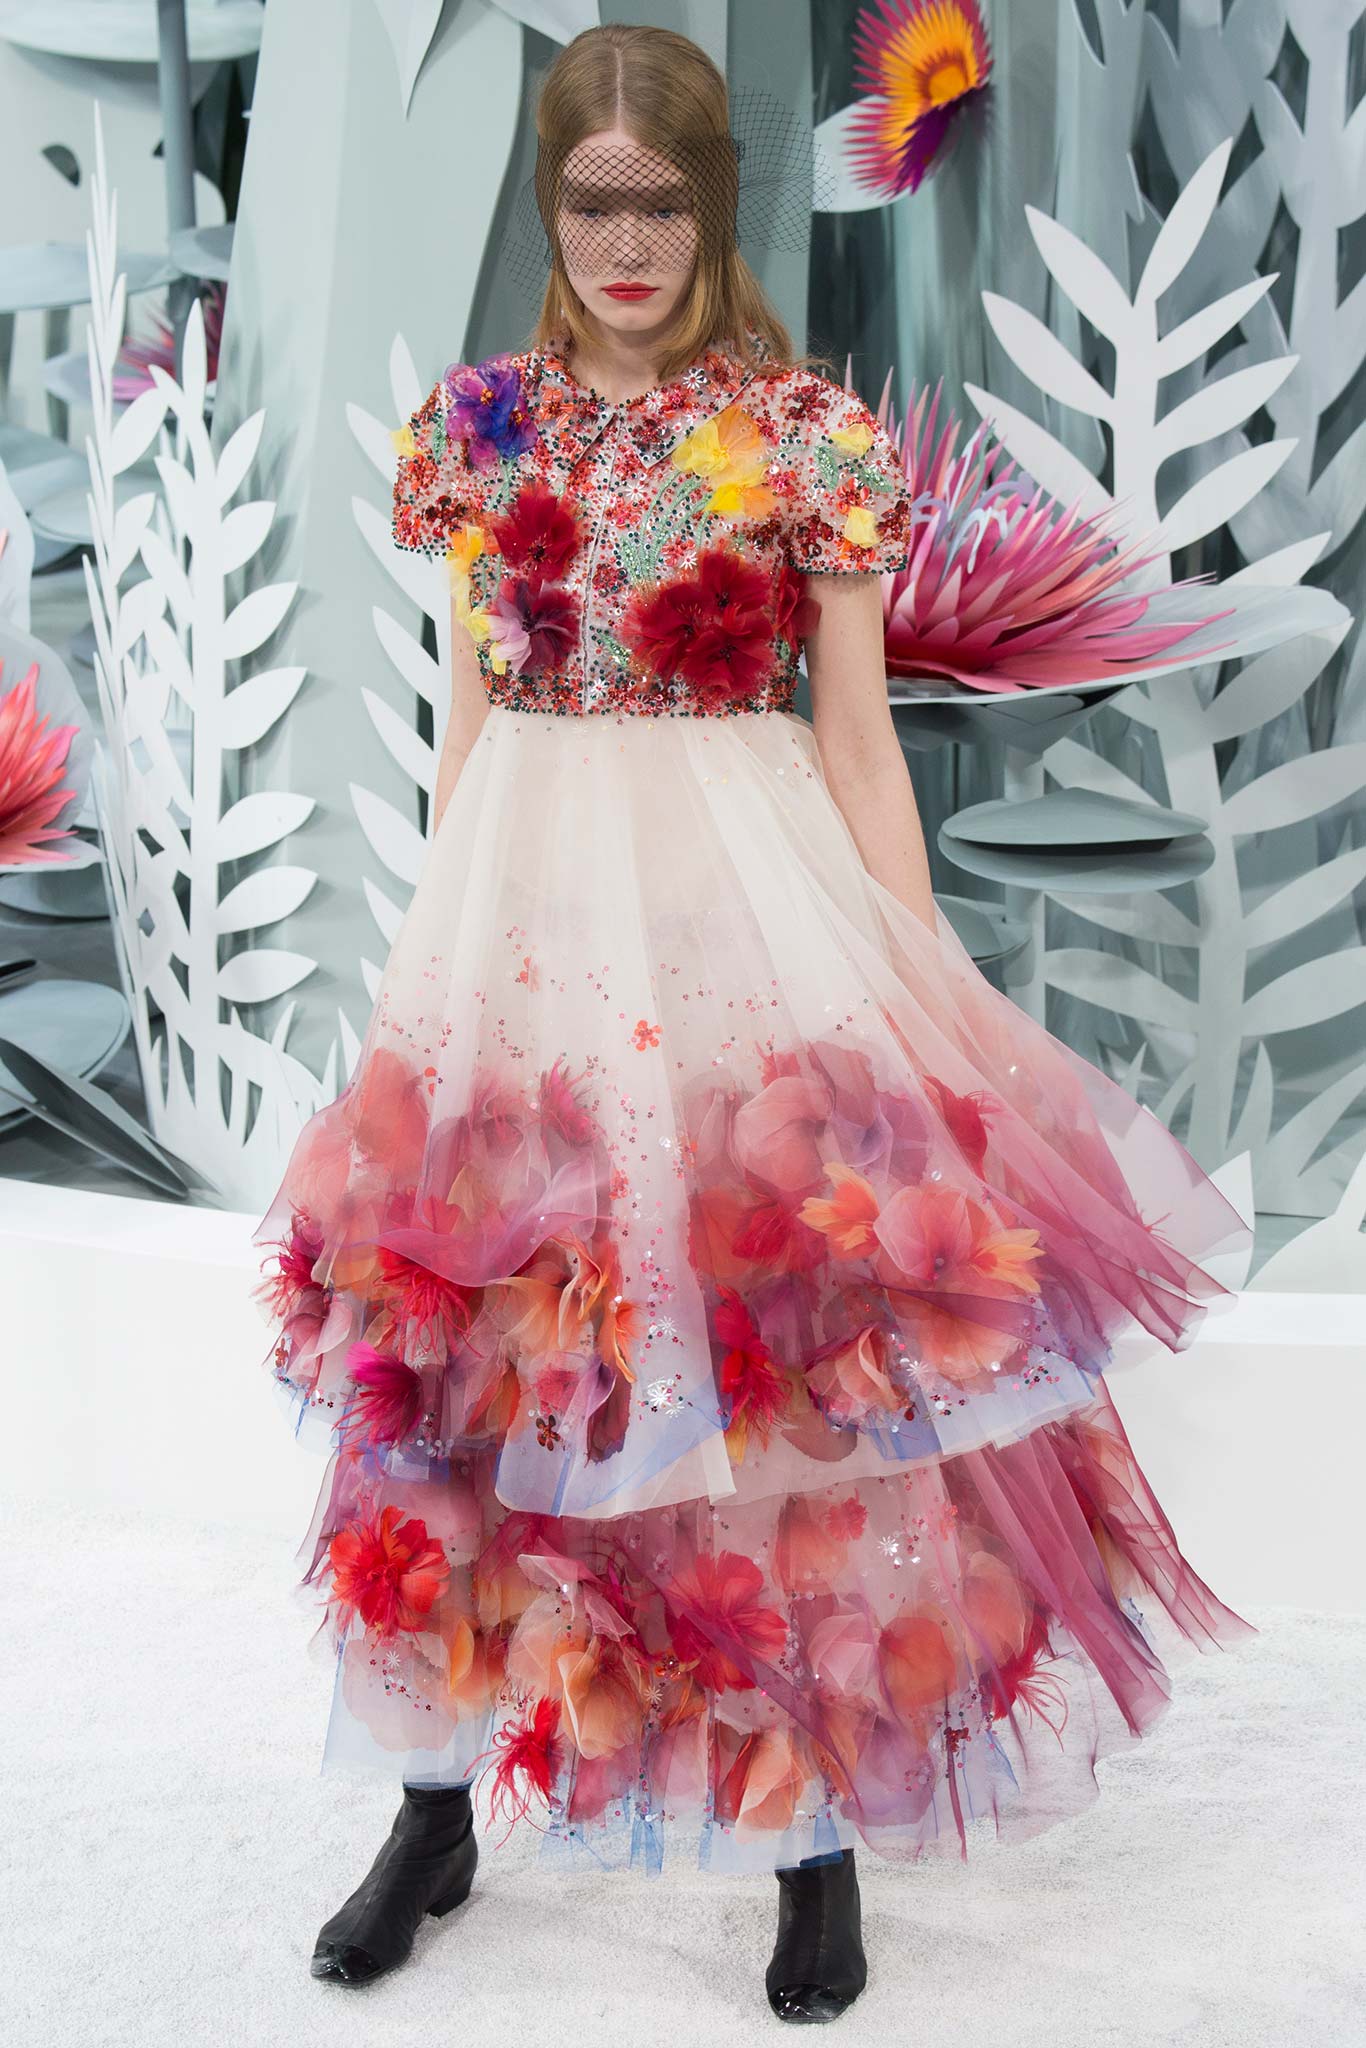 chanel-haute-couture-spring-2015-runway-show08